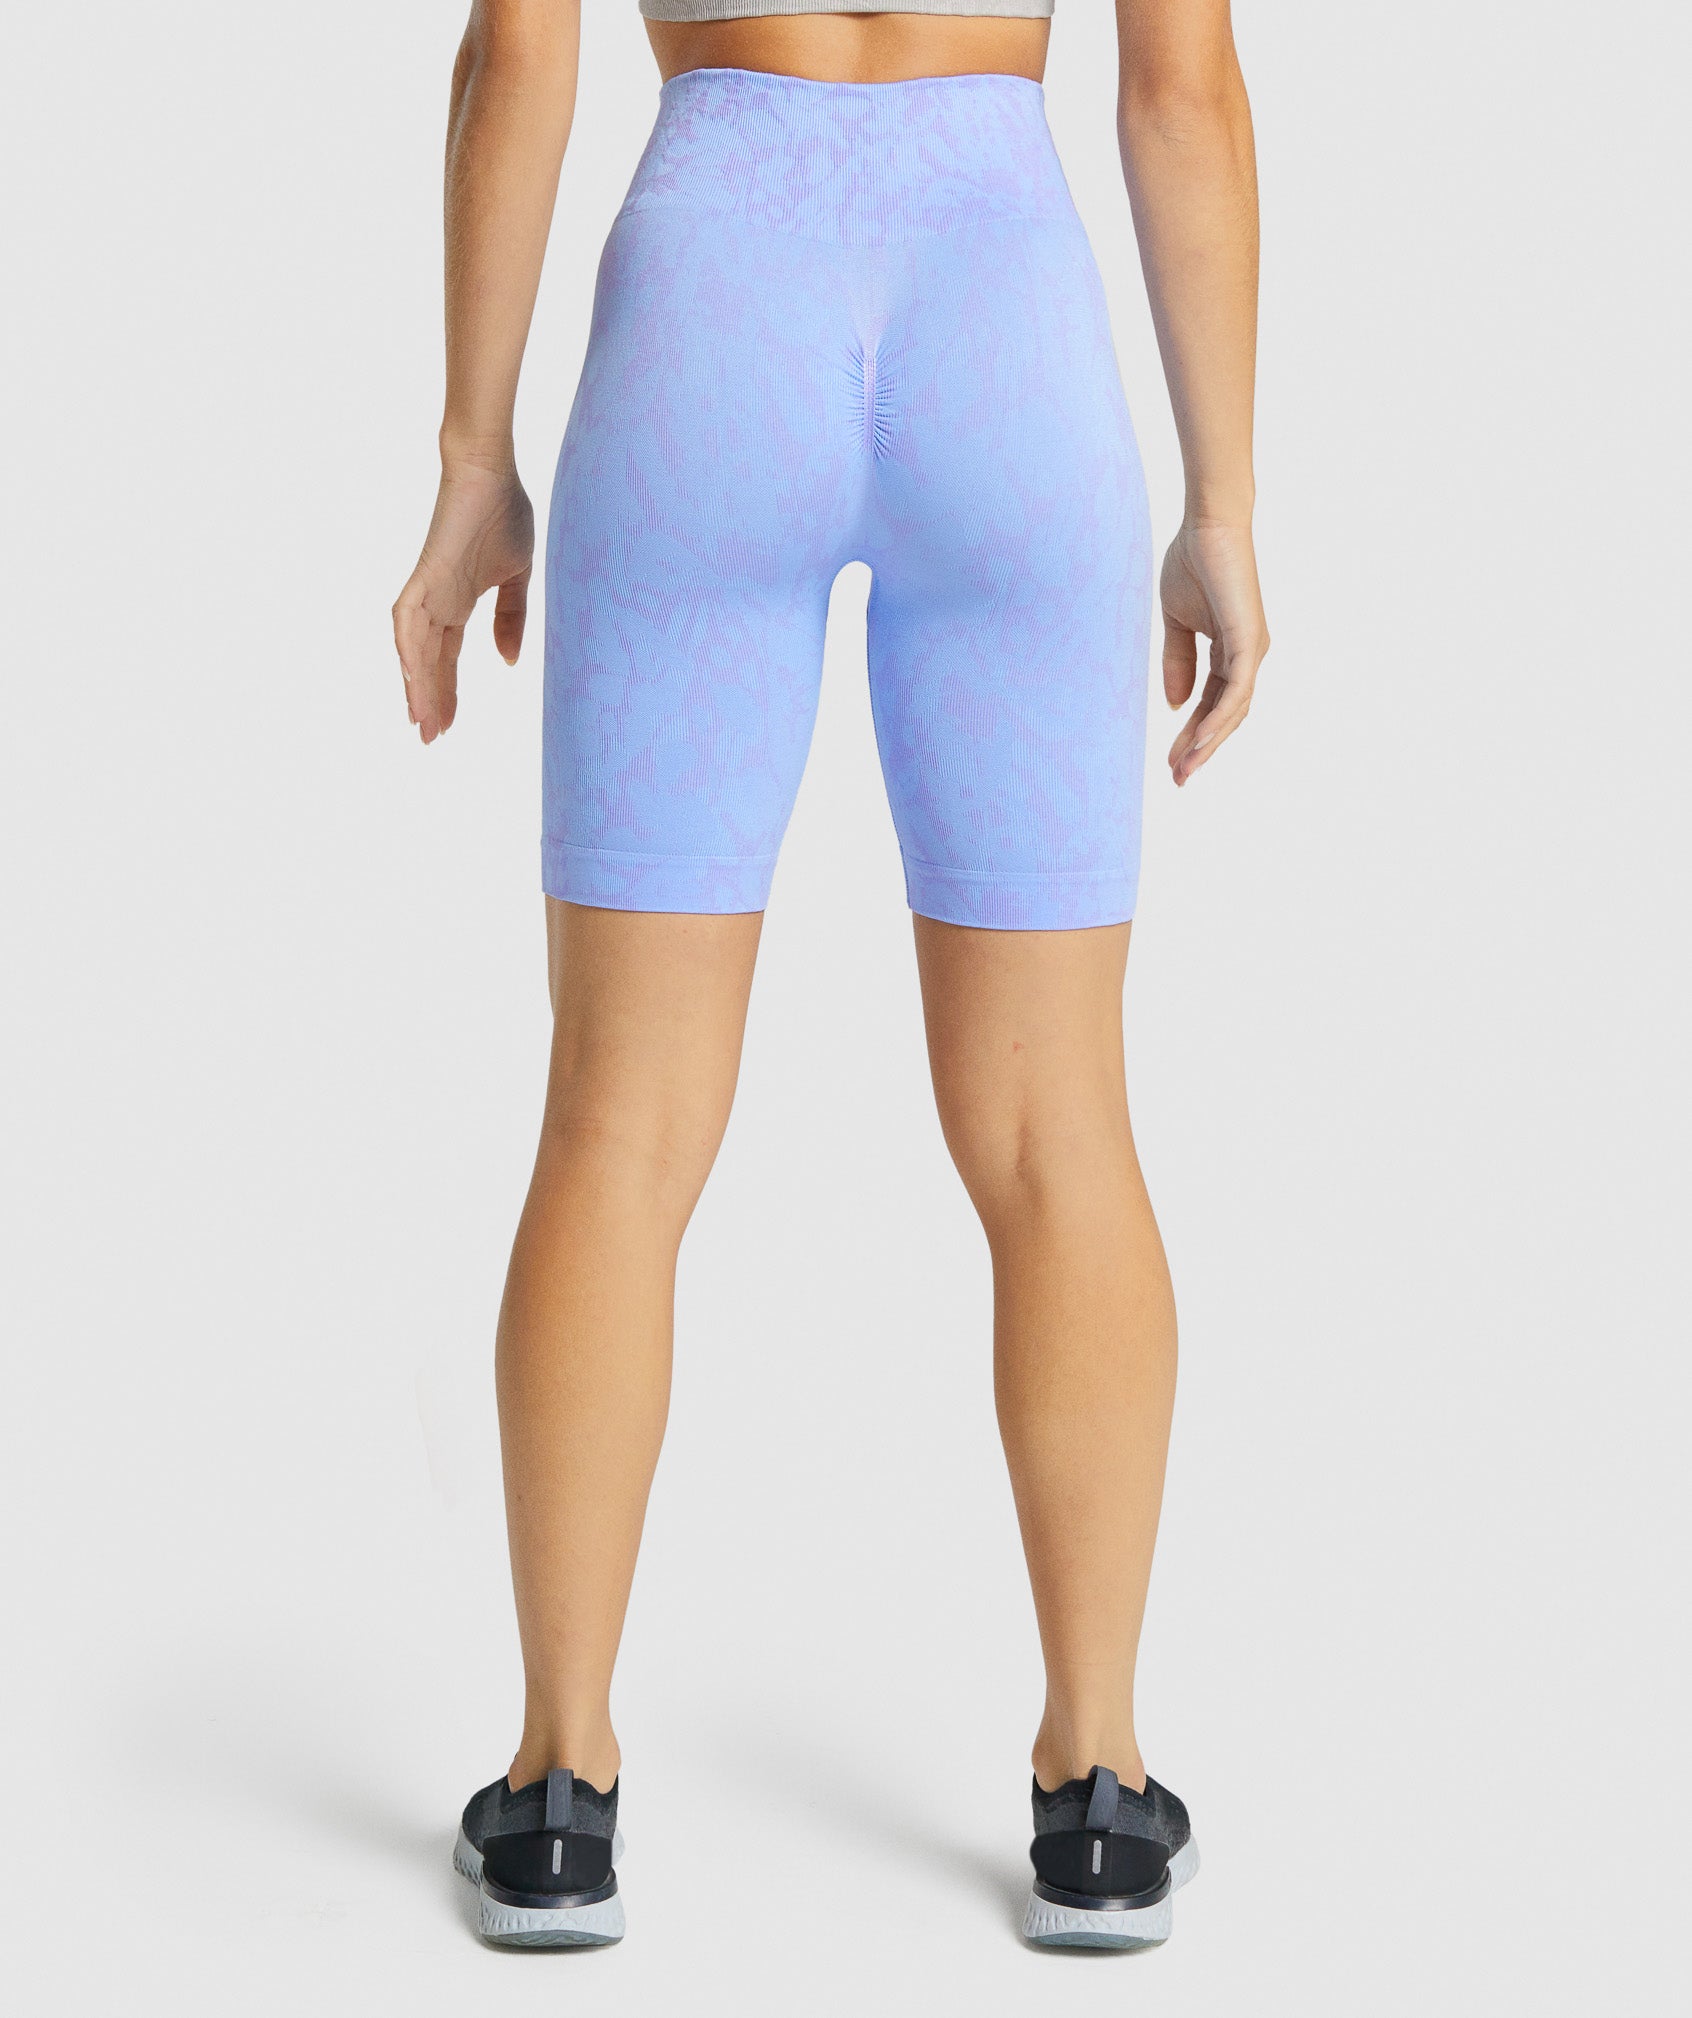 Adapt Animal Seamless Cycling Shorts in Butterfly | Light Blue - view 5